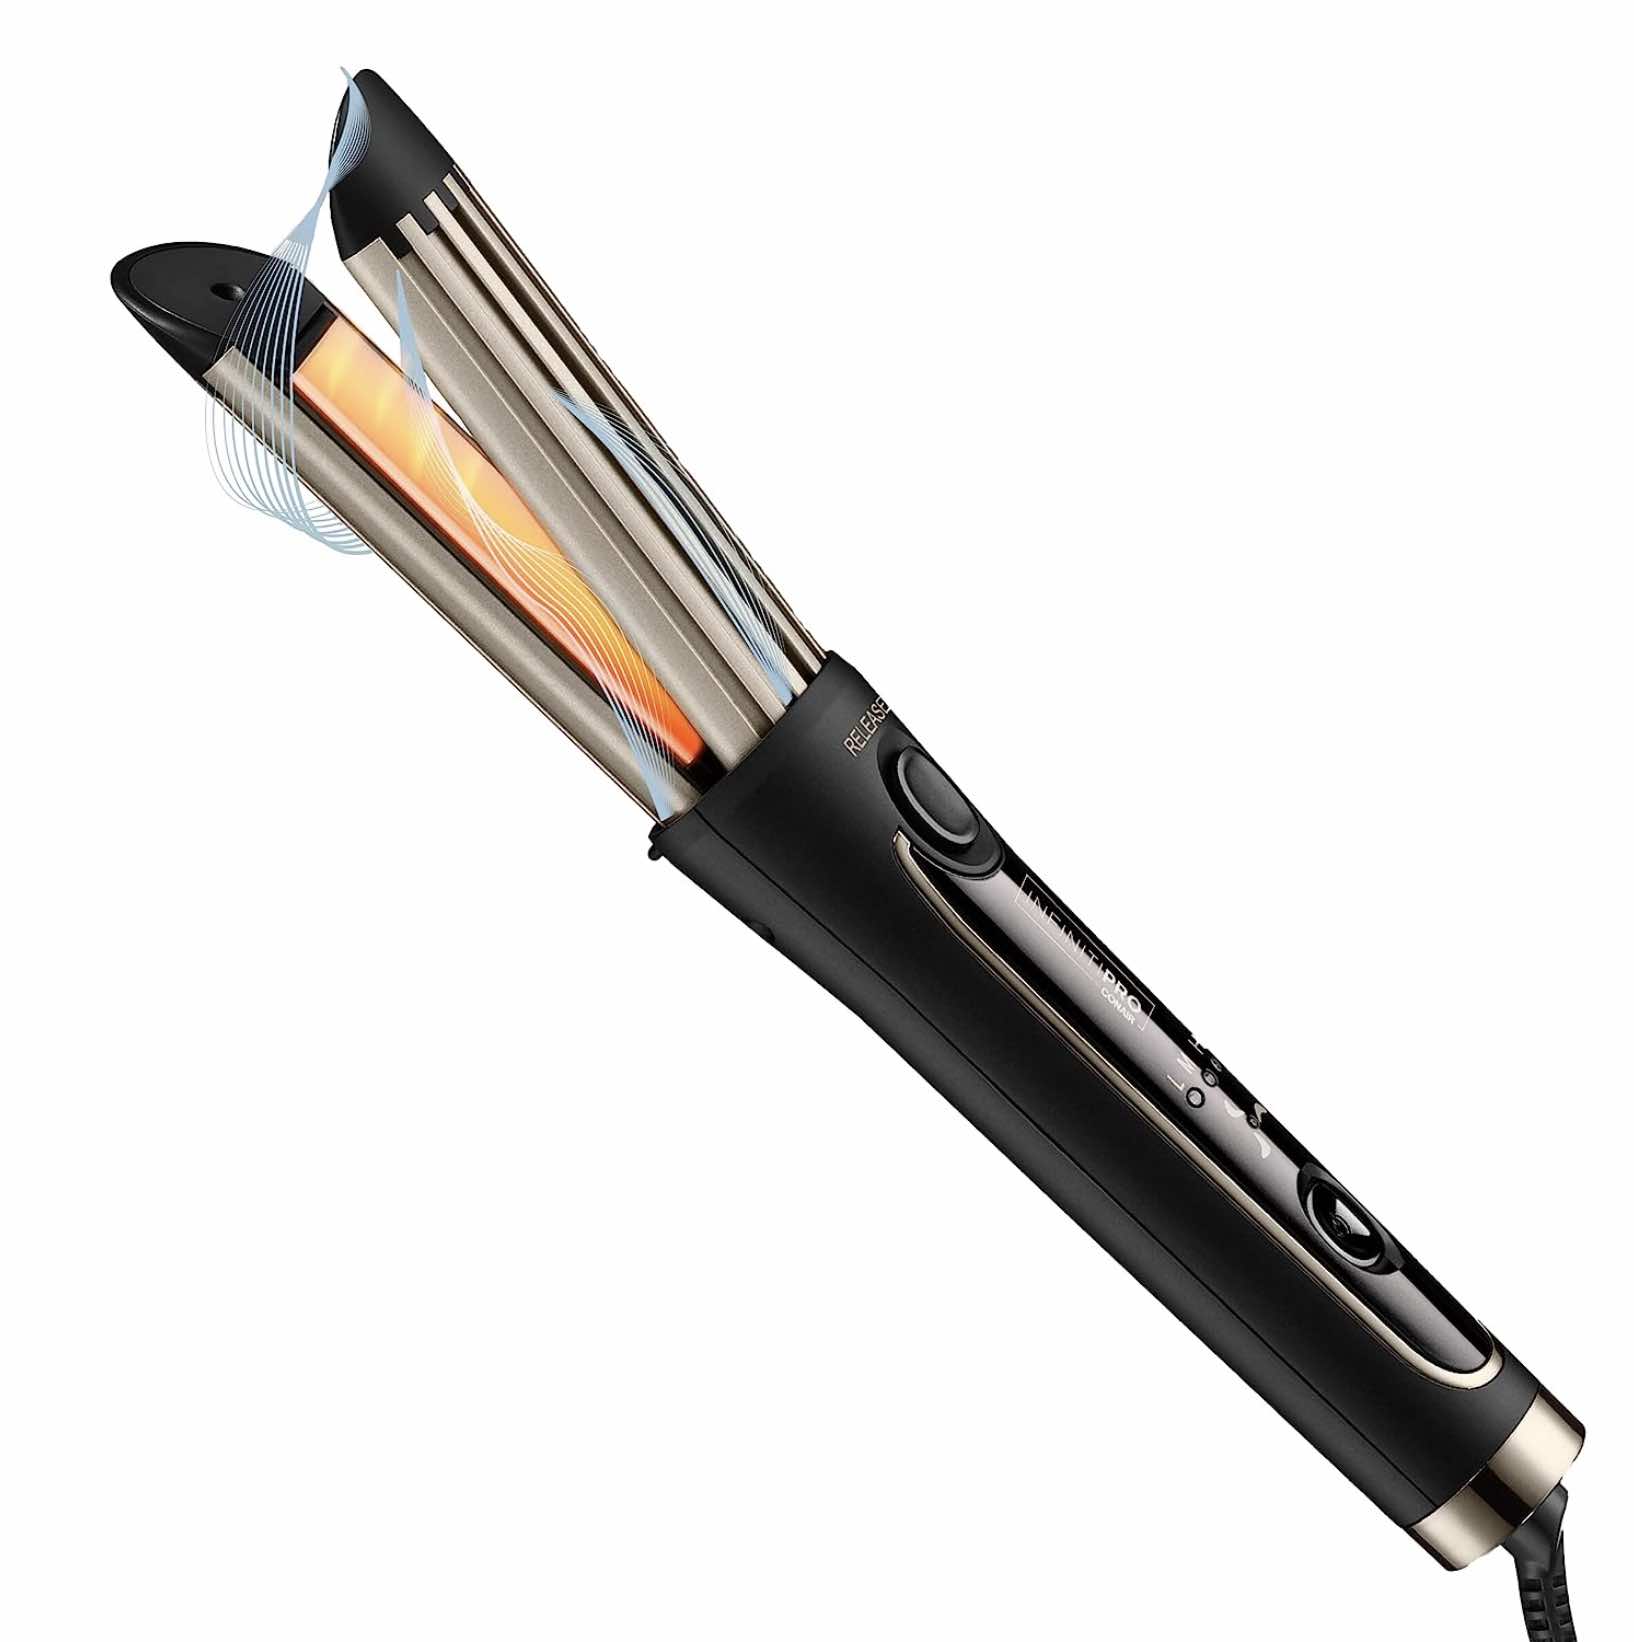 Amazon: INFINITIPRO BY CONAIR Cool Air Curling Iron $24 + Free Shipping